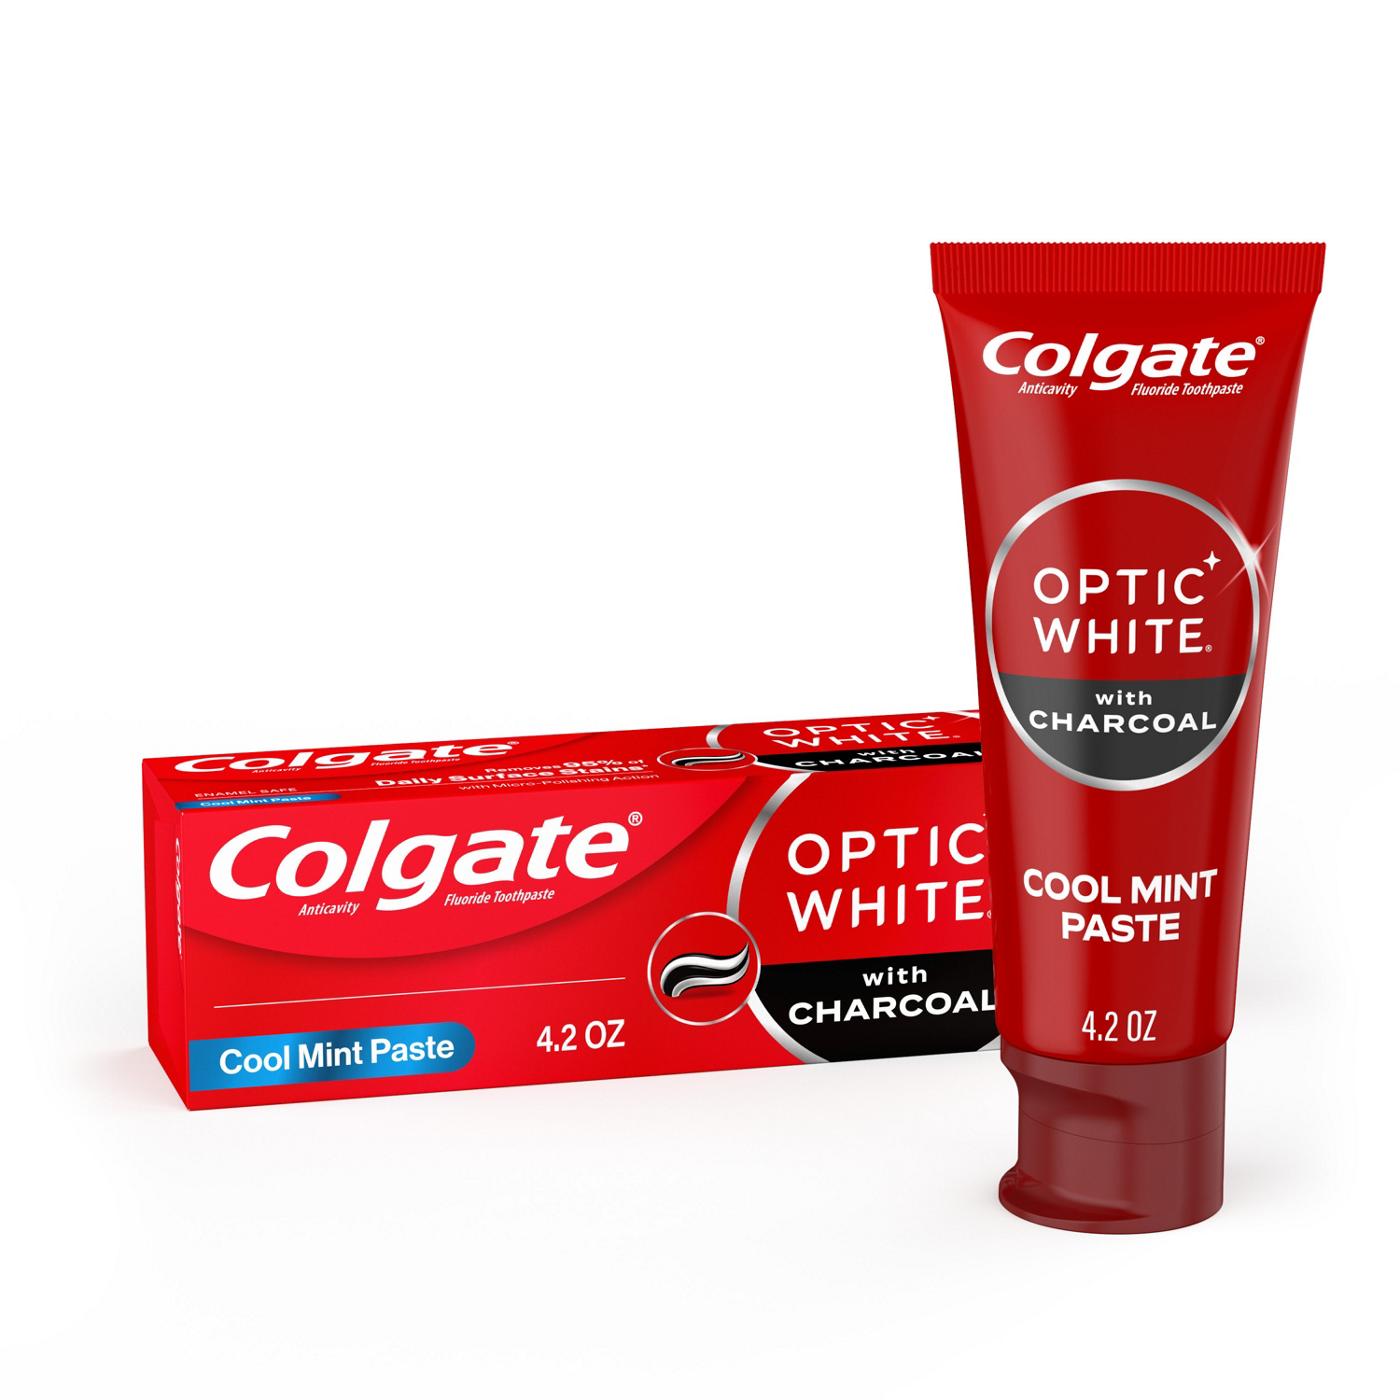 Colgate Optic White with Charcoal Anticavity Toothpaste - Cool Mint; image 6 of 10